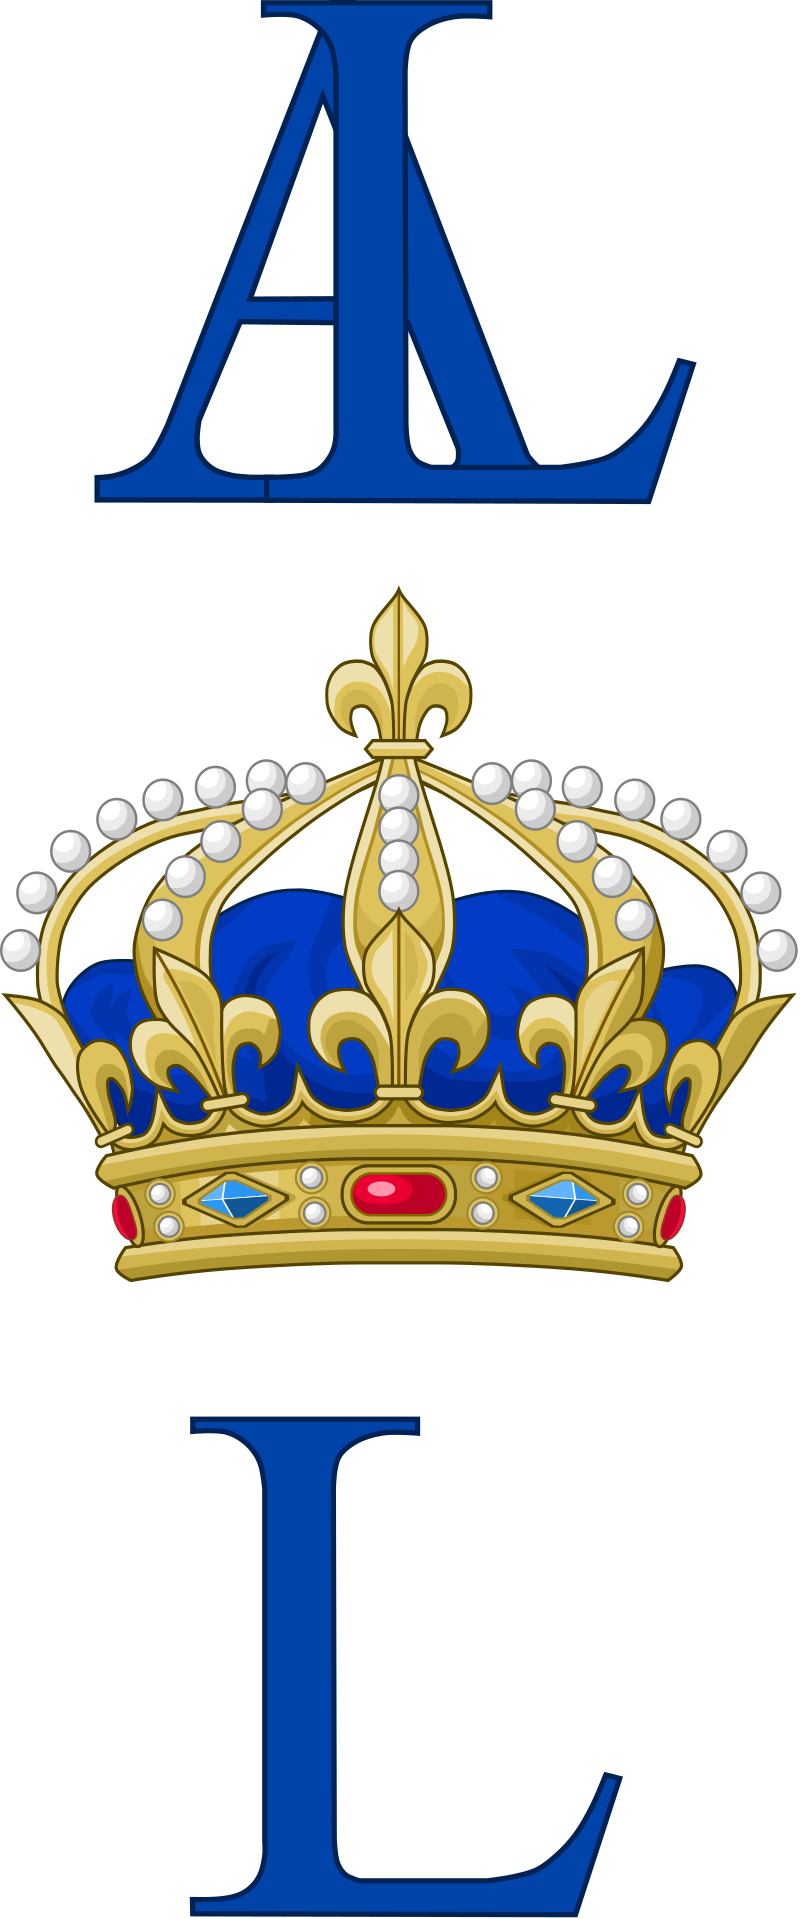 File:Royal Monogram of King Louis XIII of France.svg - Wikipedia